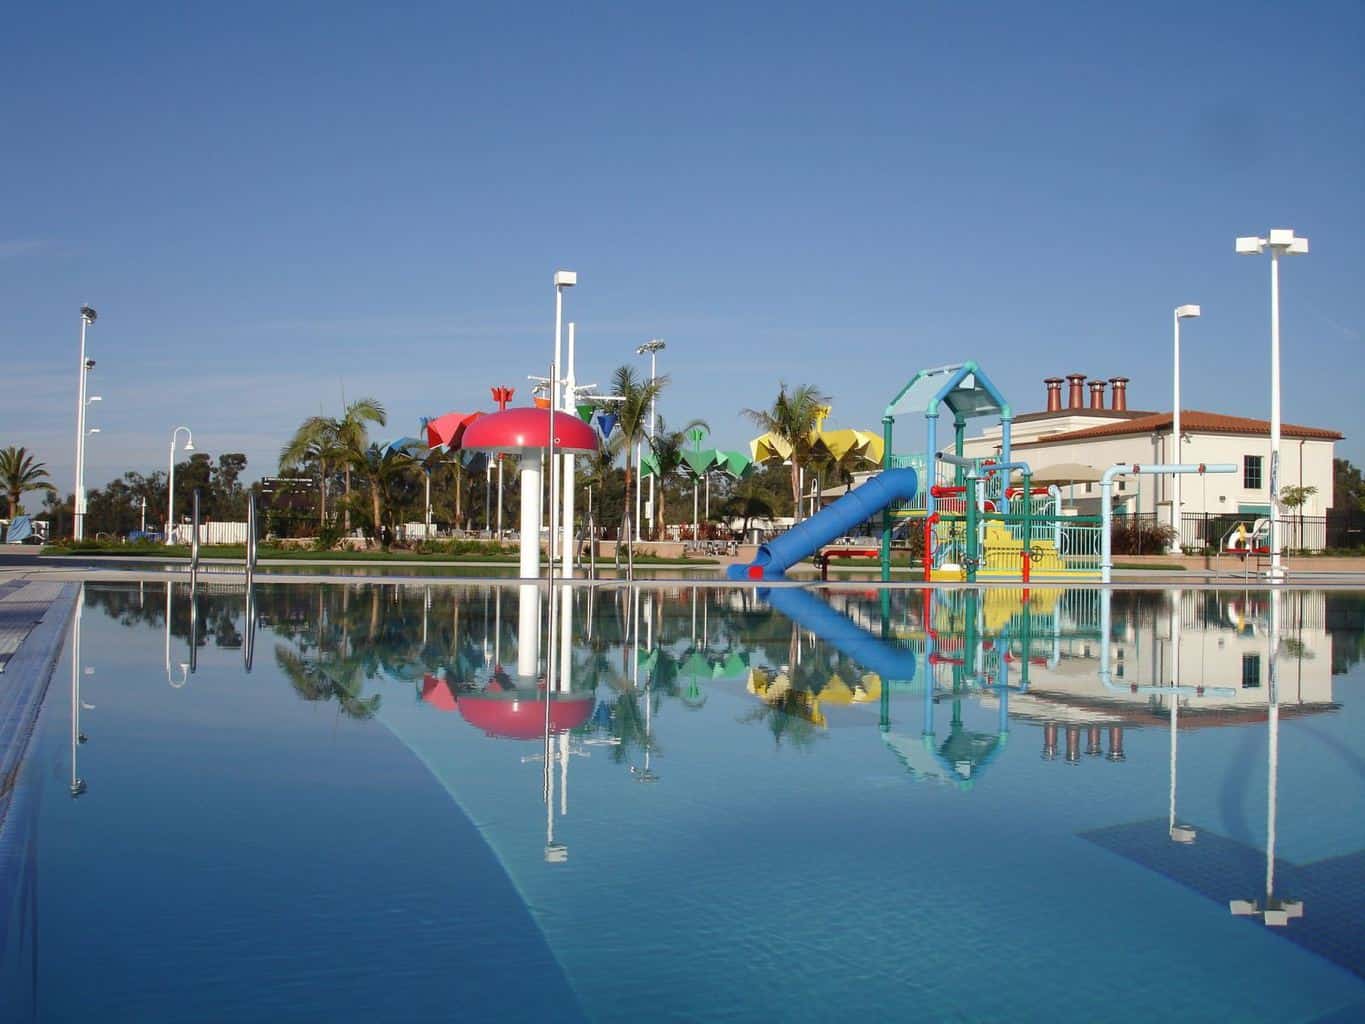 Check out this list of 20+ Water Parks in Southern California